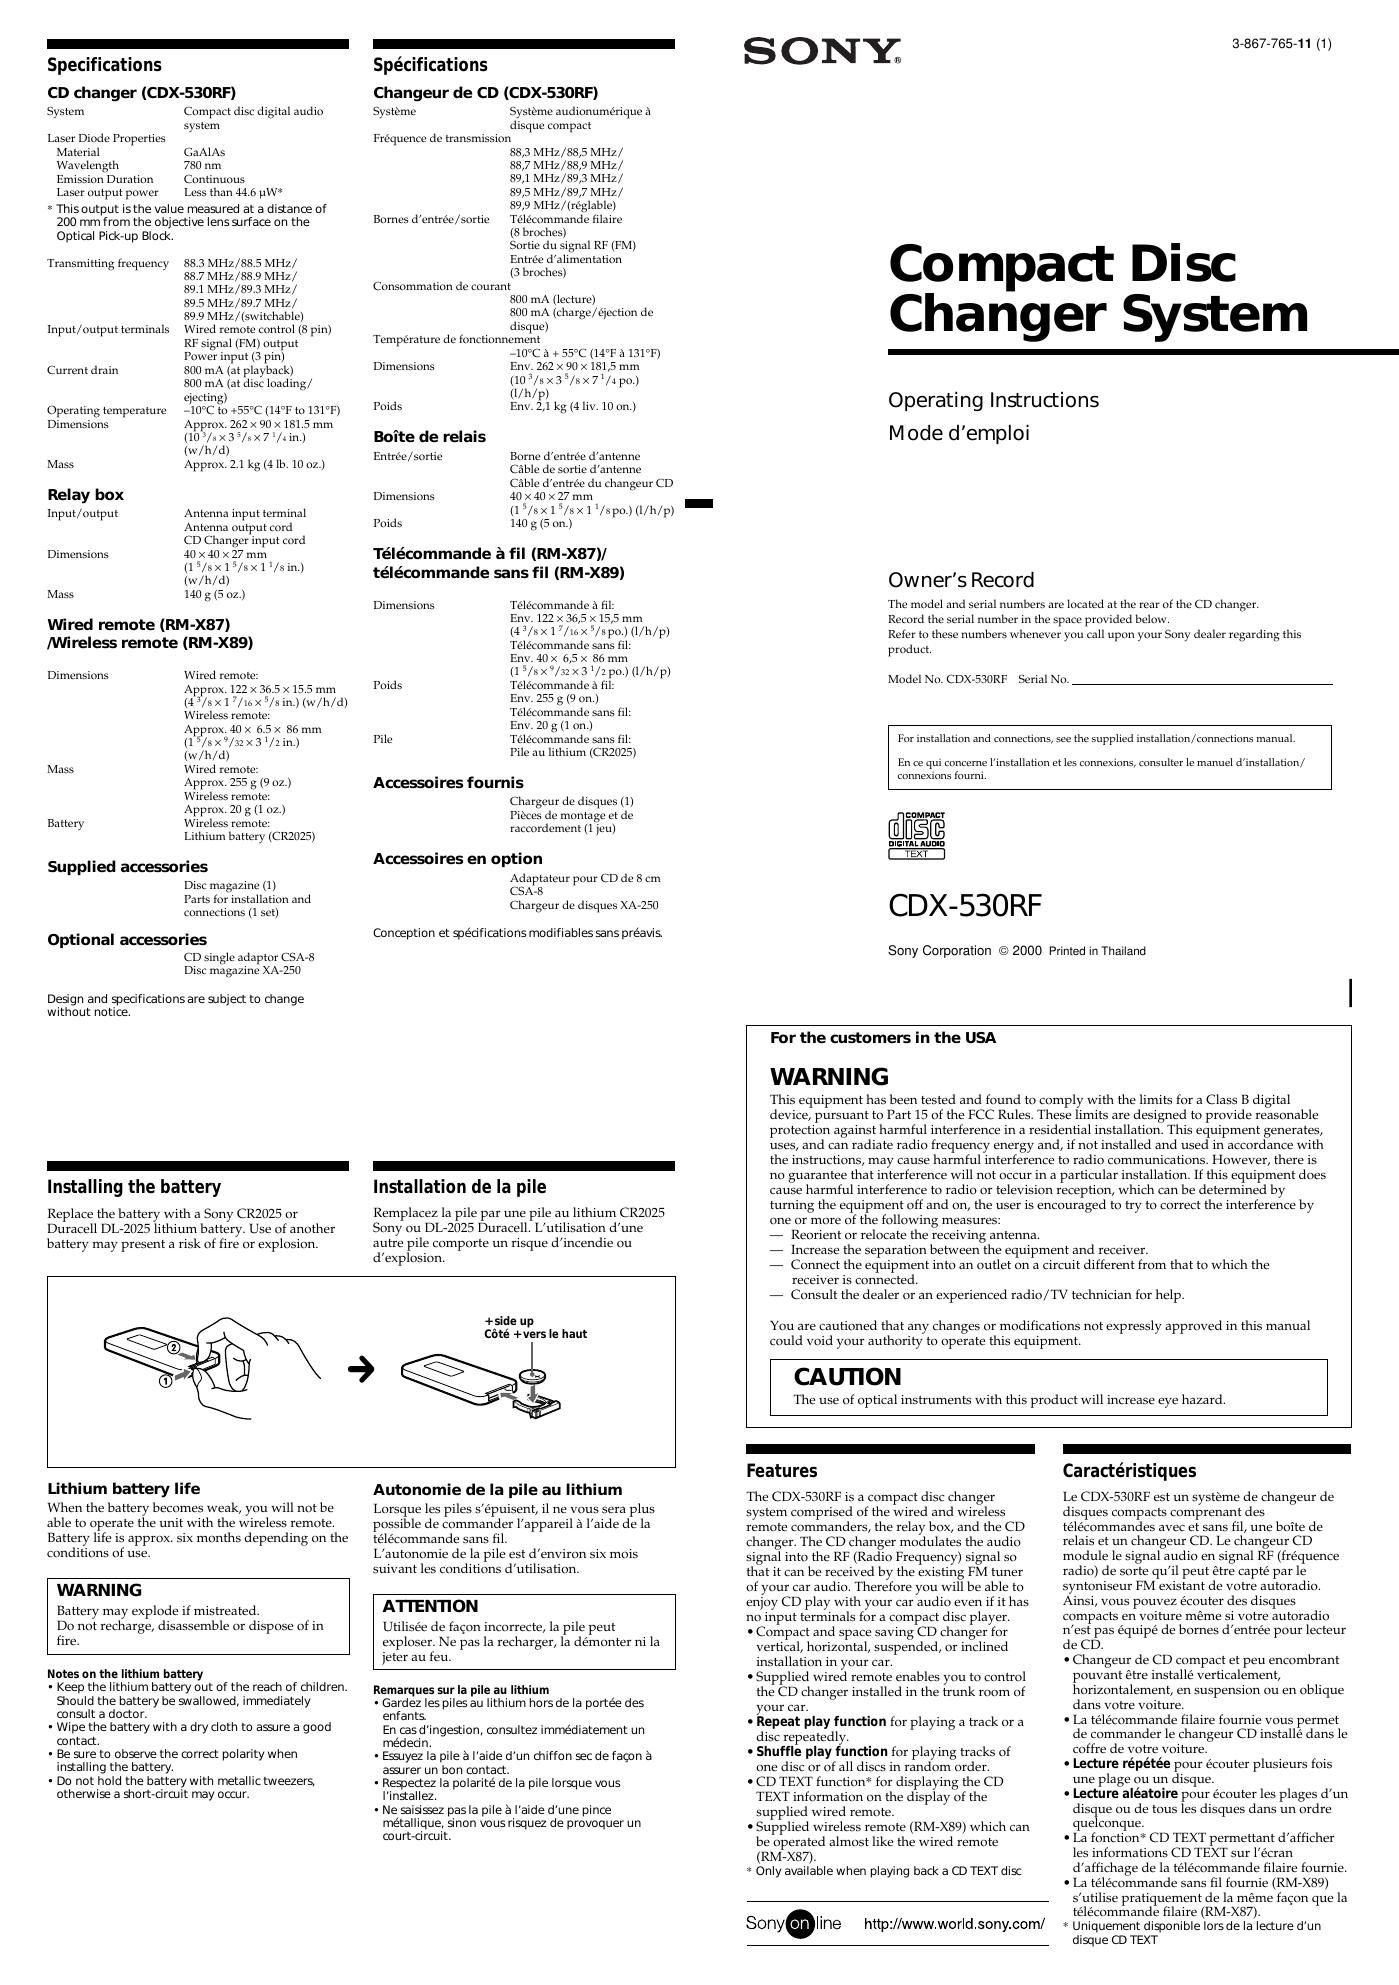 sony cdx 530 rf owners manual